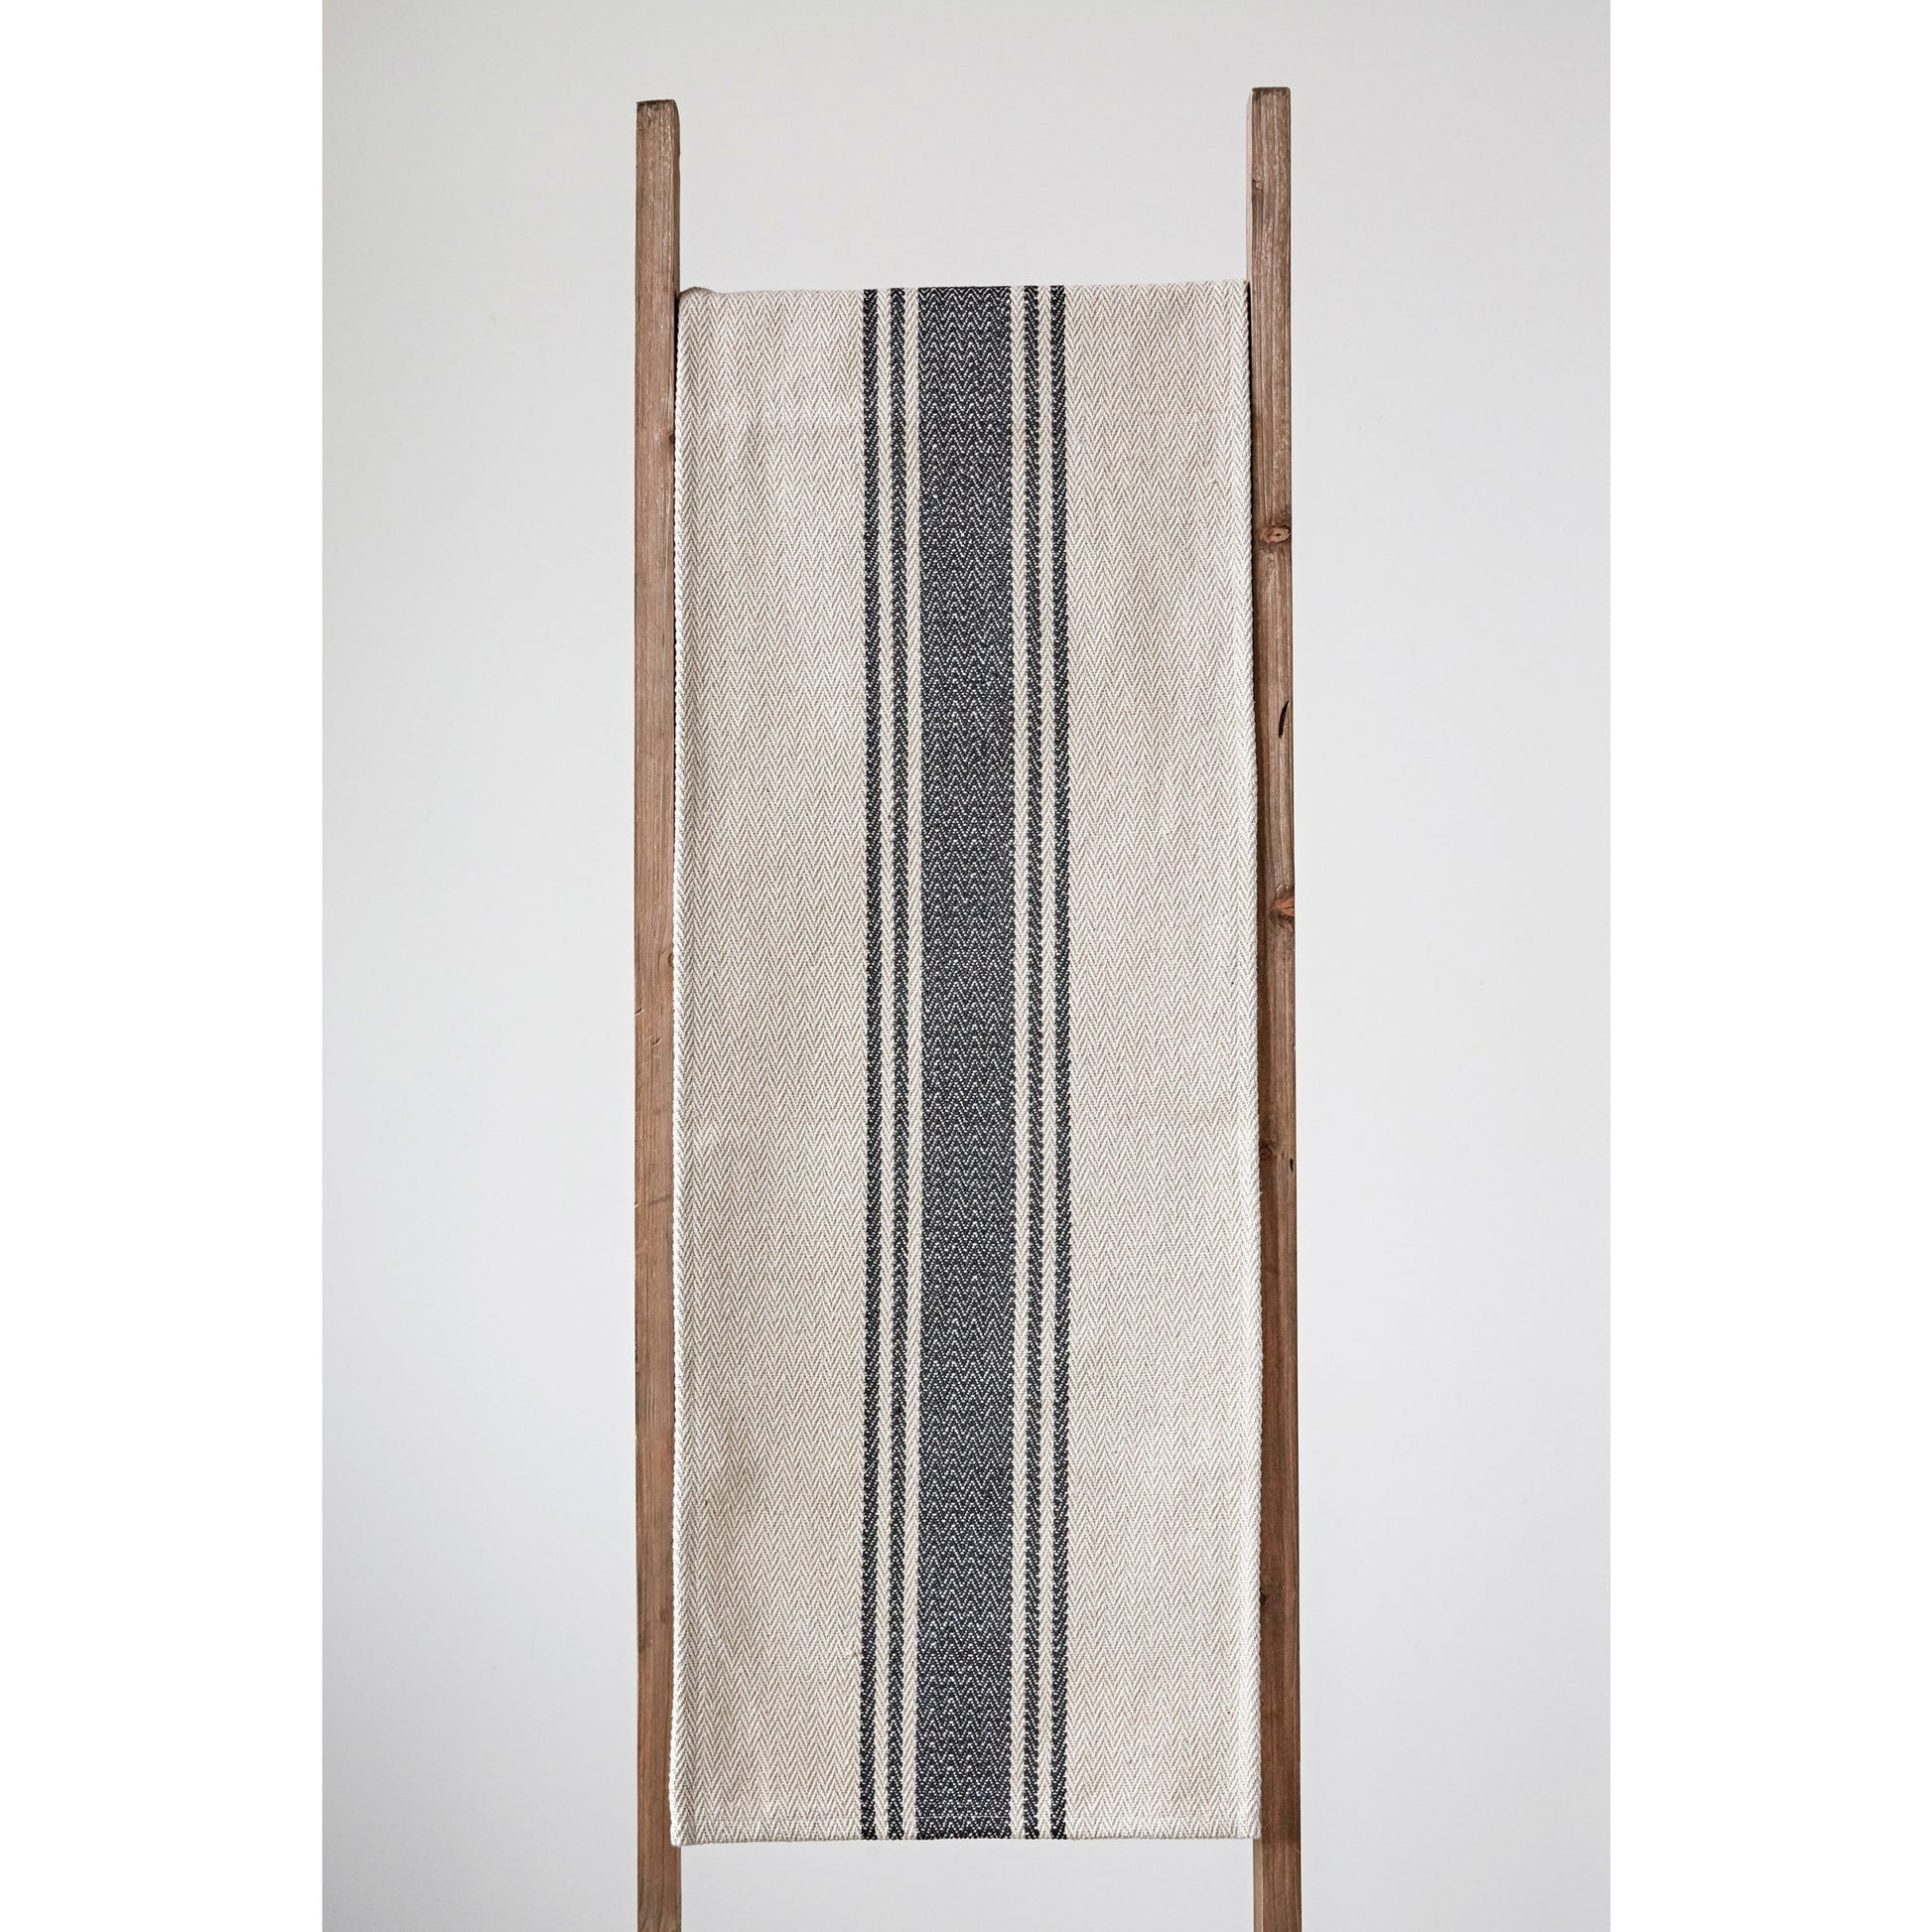 Woven cotton cream and black striped table runner draped over ladder